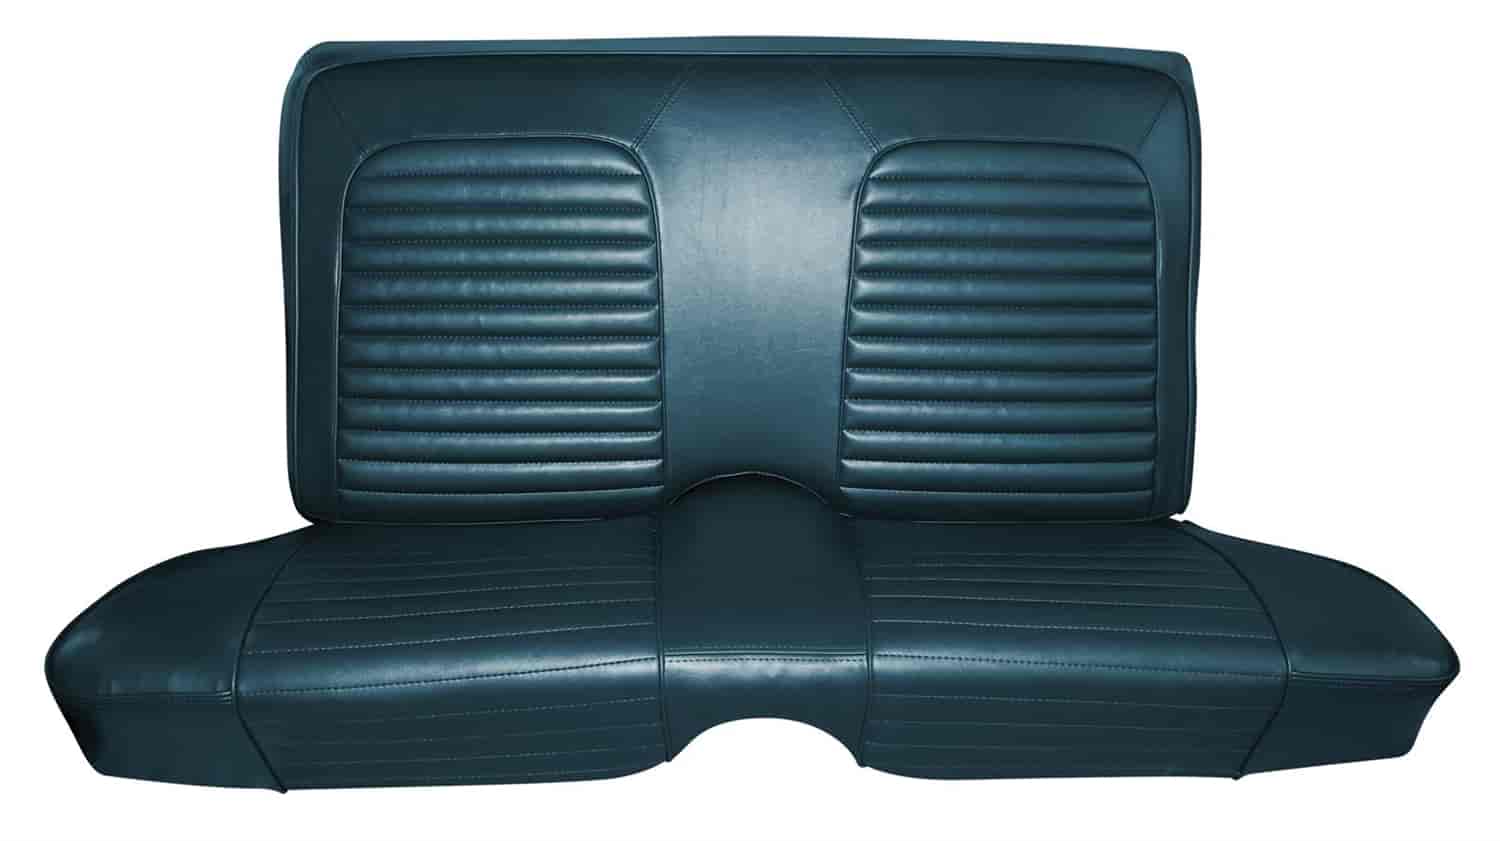 1963 Ford Falcon Futura 2-Door Sedan Interior Rear Bench Seat Upholstery for Models with Front Bucket Seats Upholstery Set